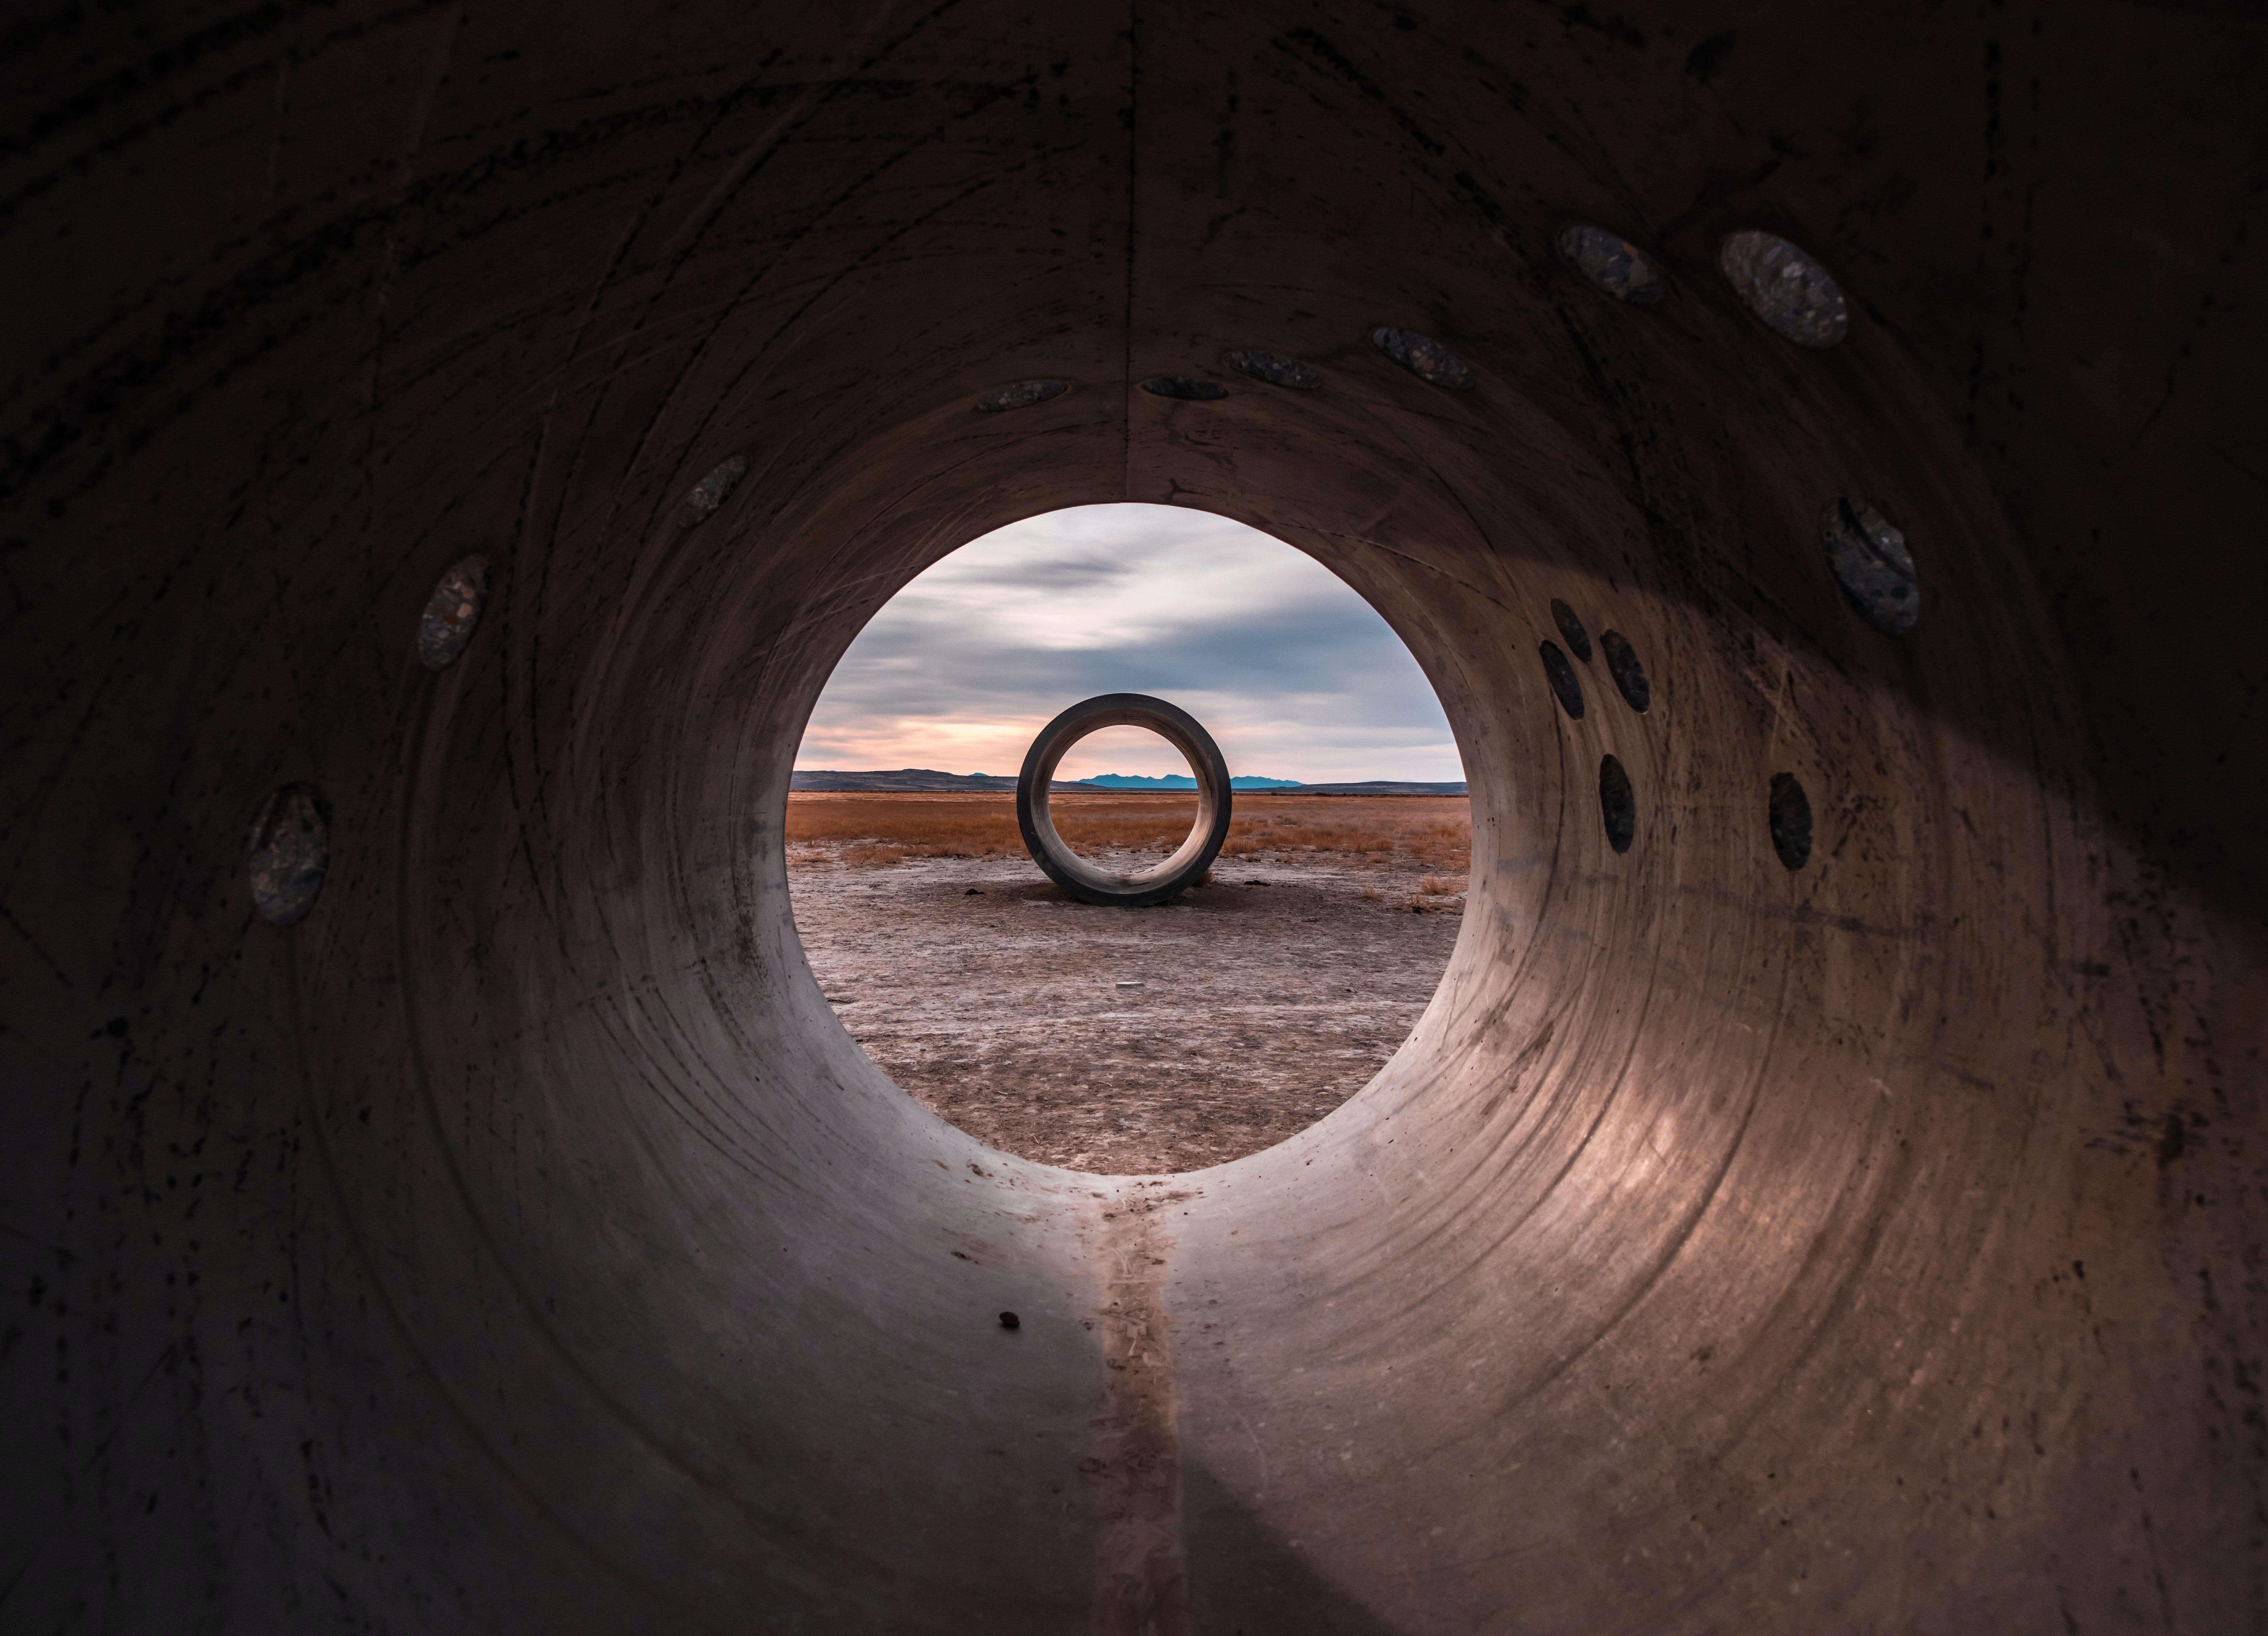 view into a tube